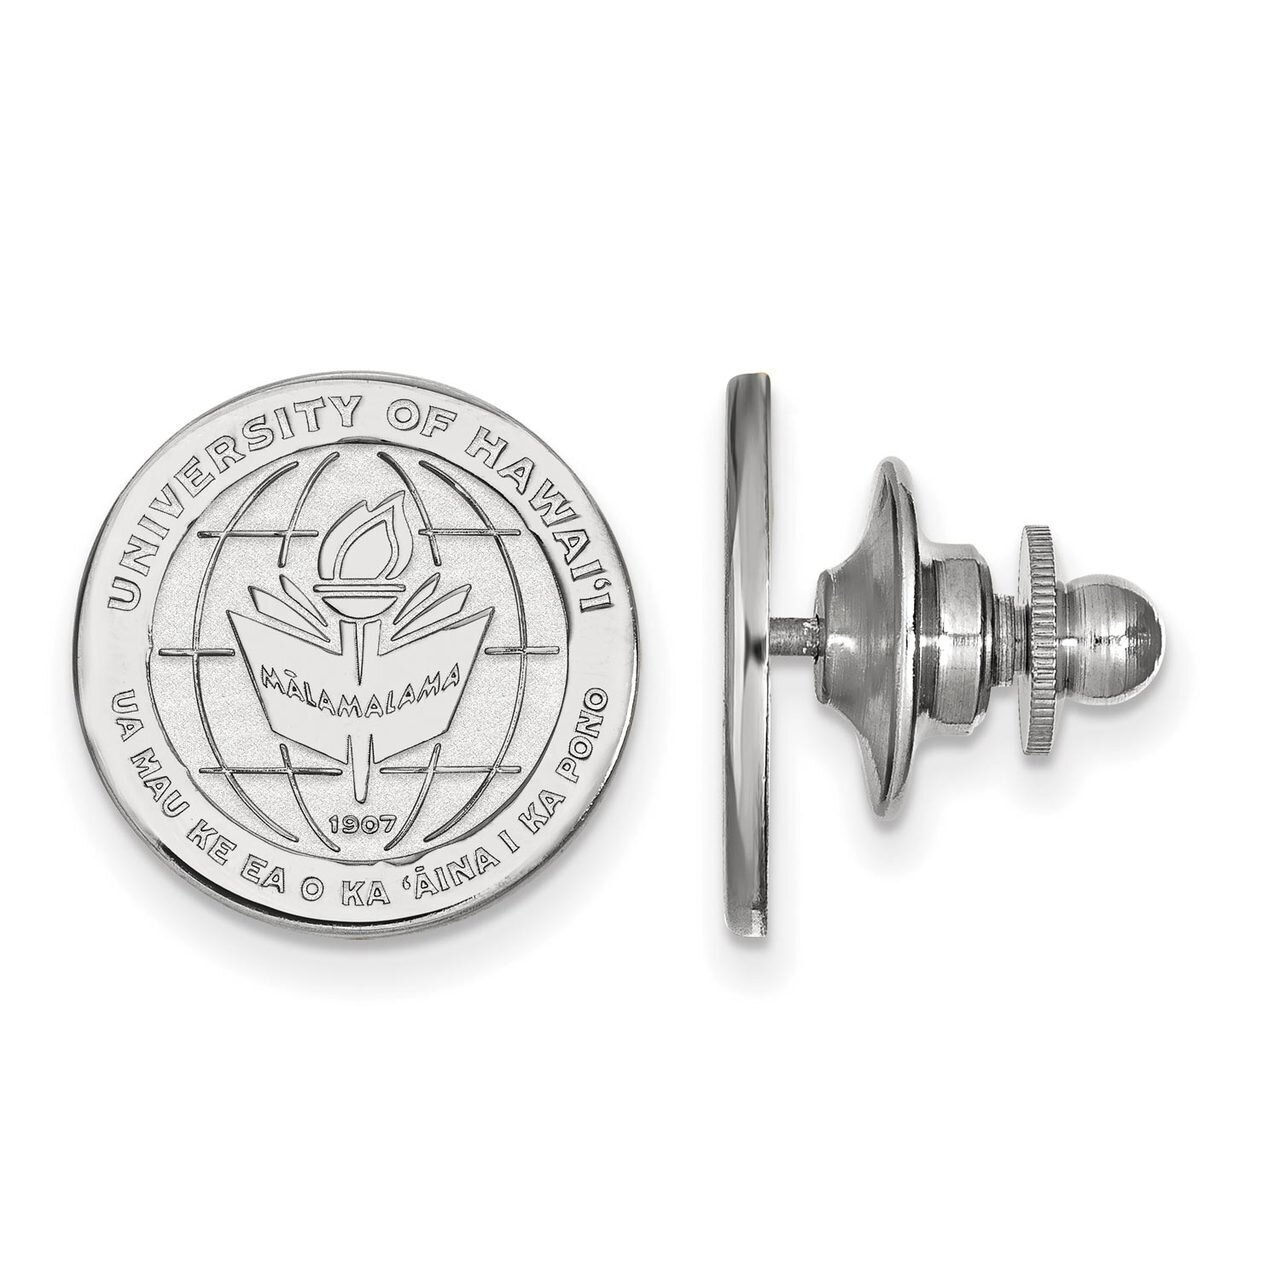 The University of Hawai'i Crest Lapel Pin Sterling Silver SS016UHI